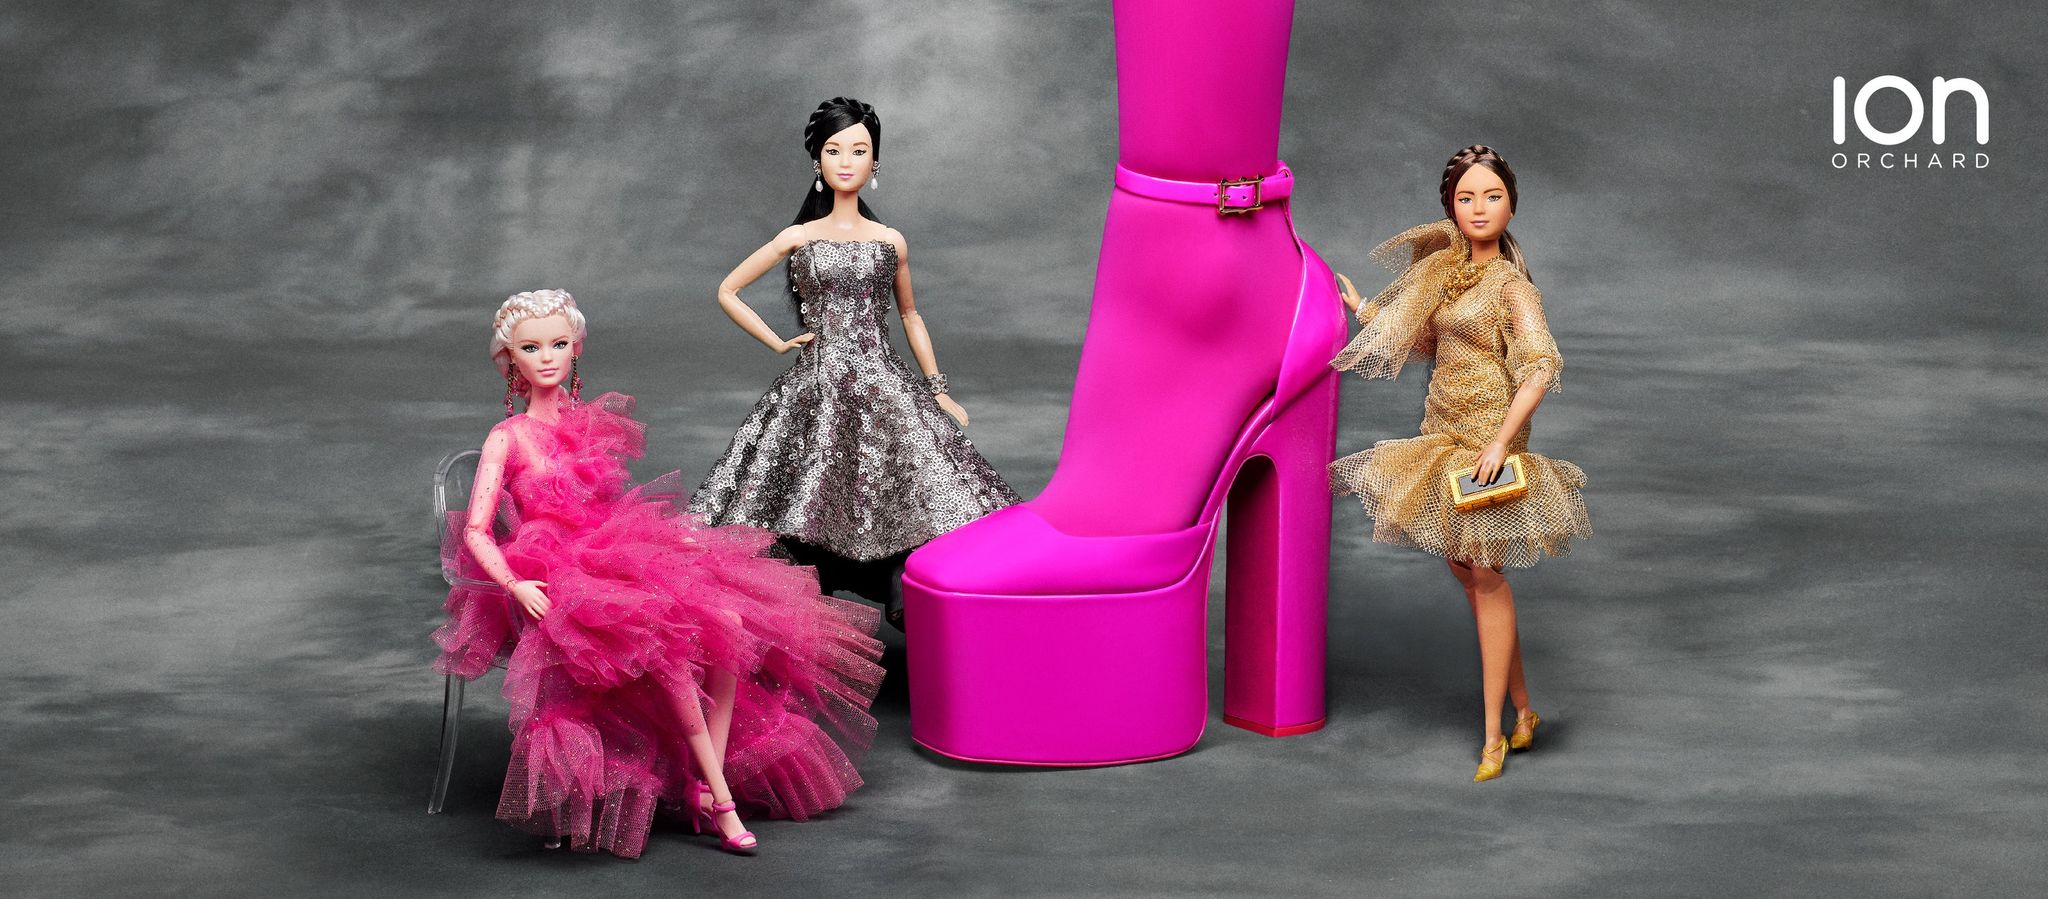 House of Dreams Exhibition at ION Orchard Showcases Over 600 Barbie Dolls